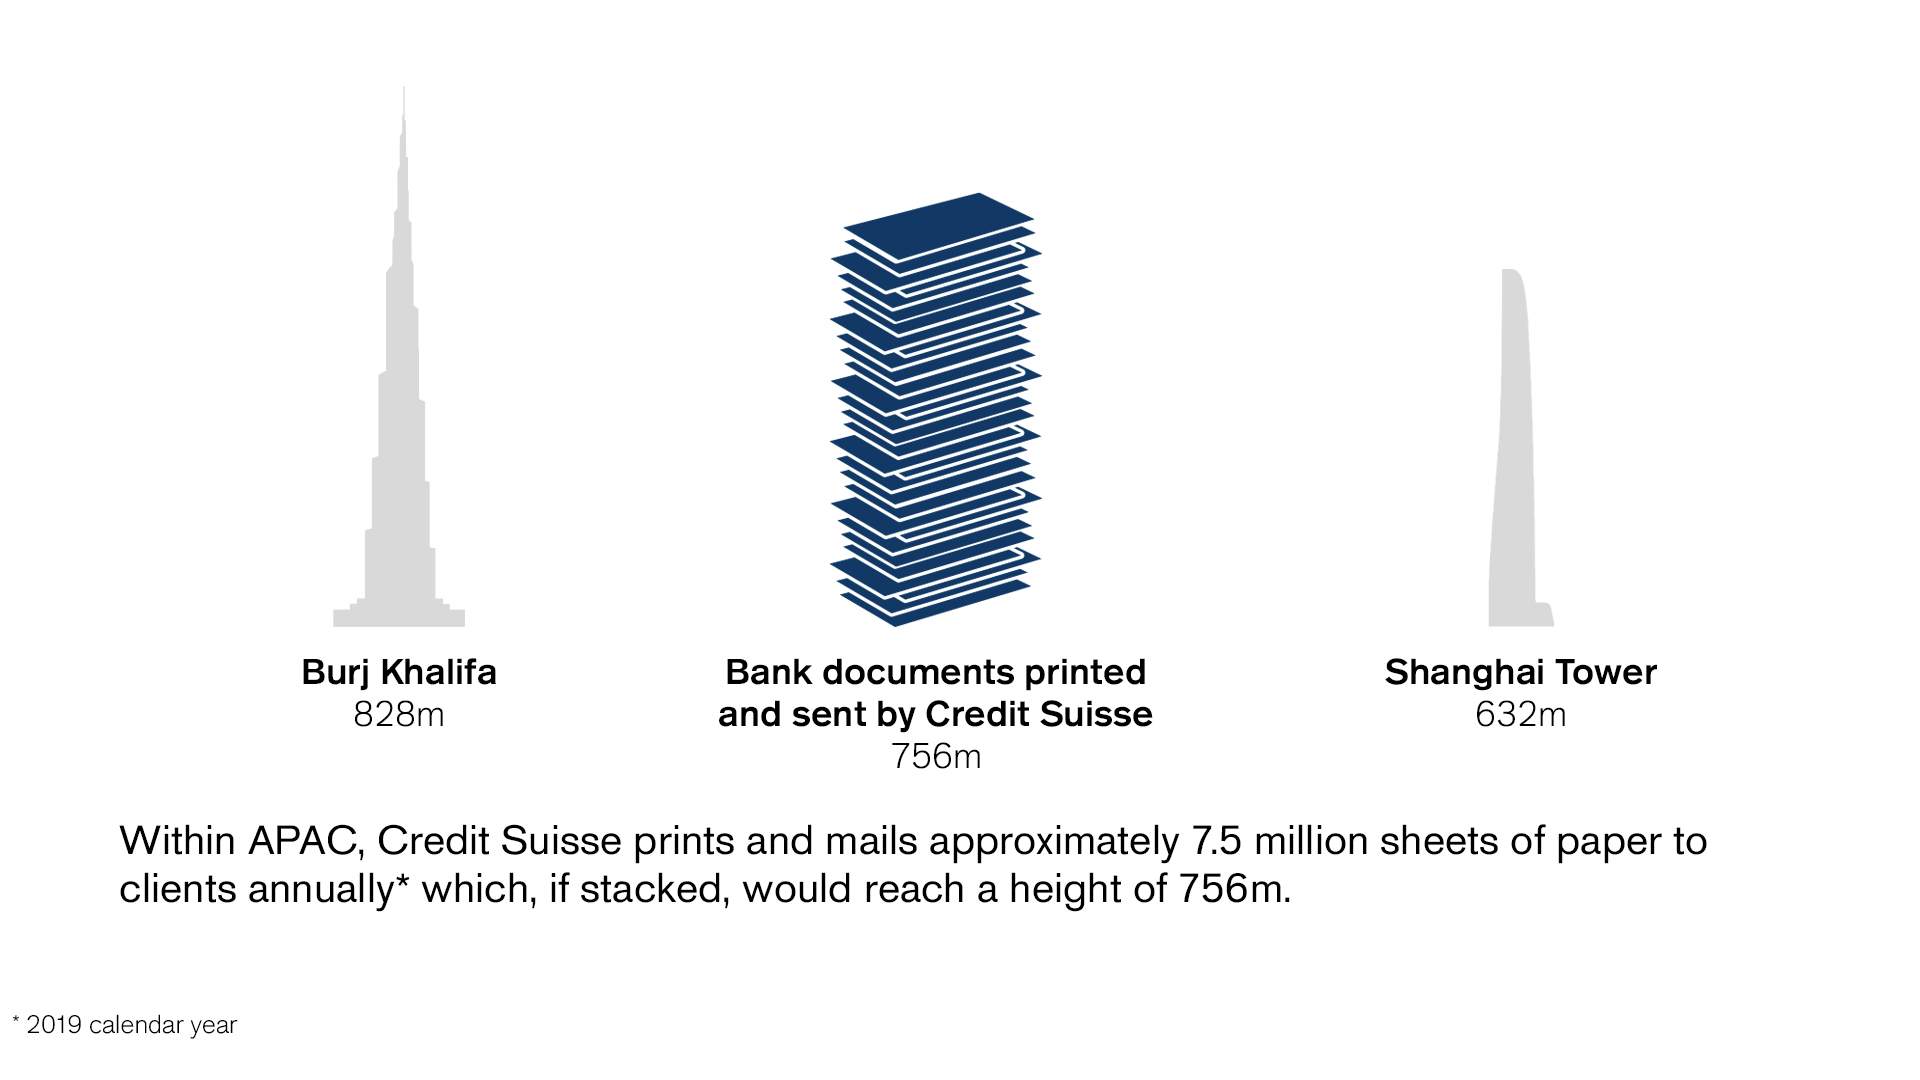 Within APAC, Credit Suisse prints and mails approximately 7.5 million sheets of paper to clients annually